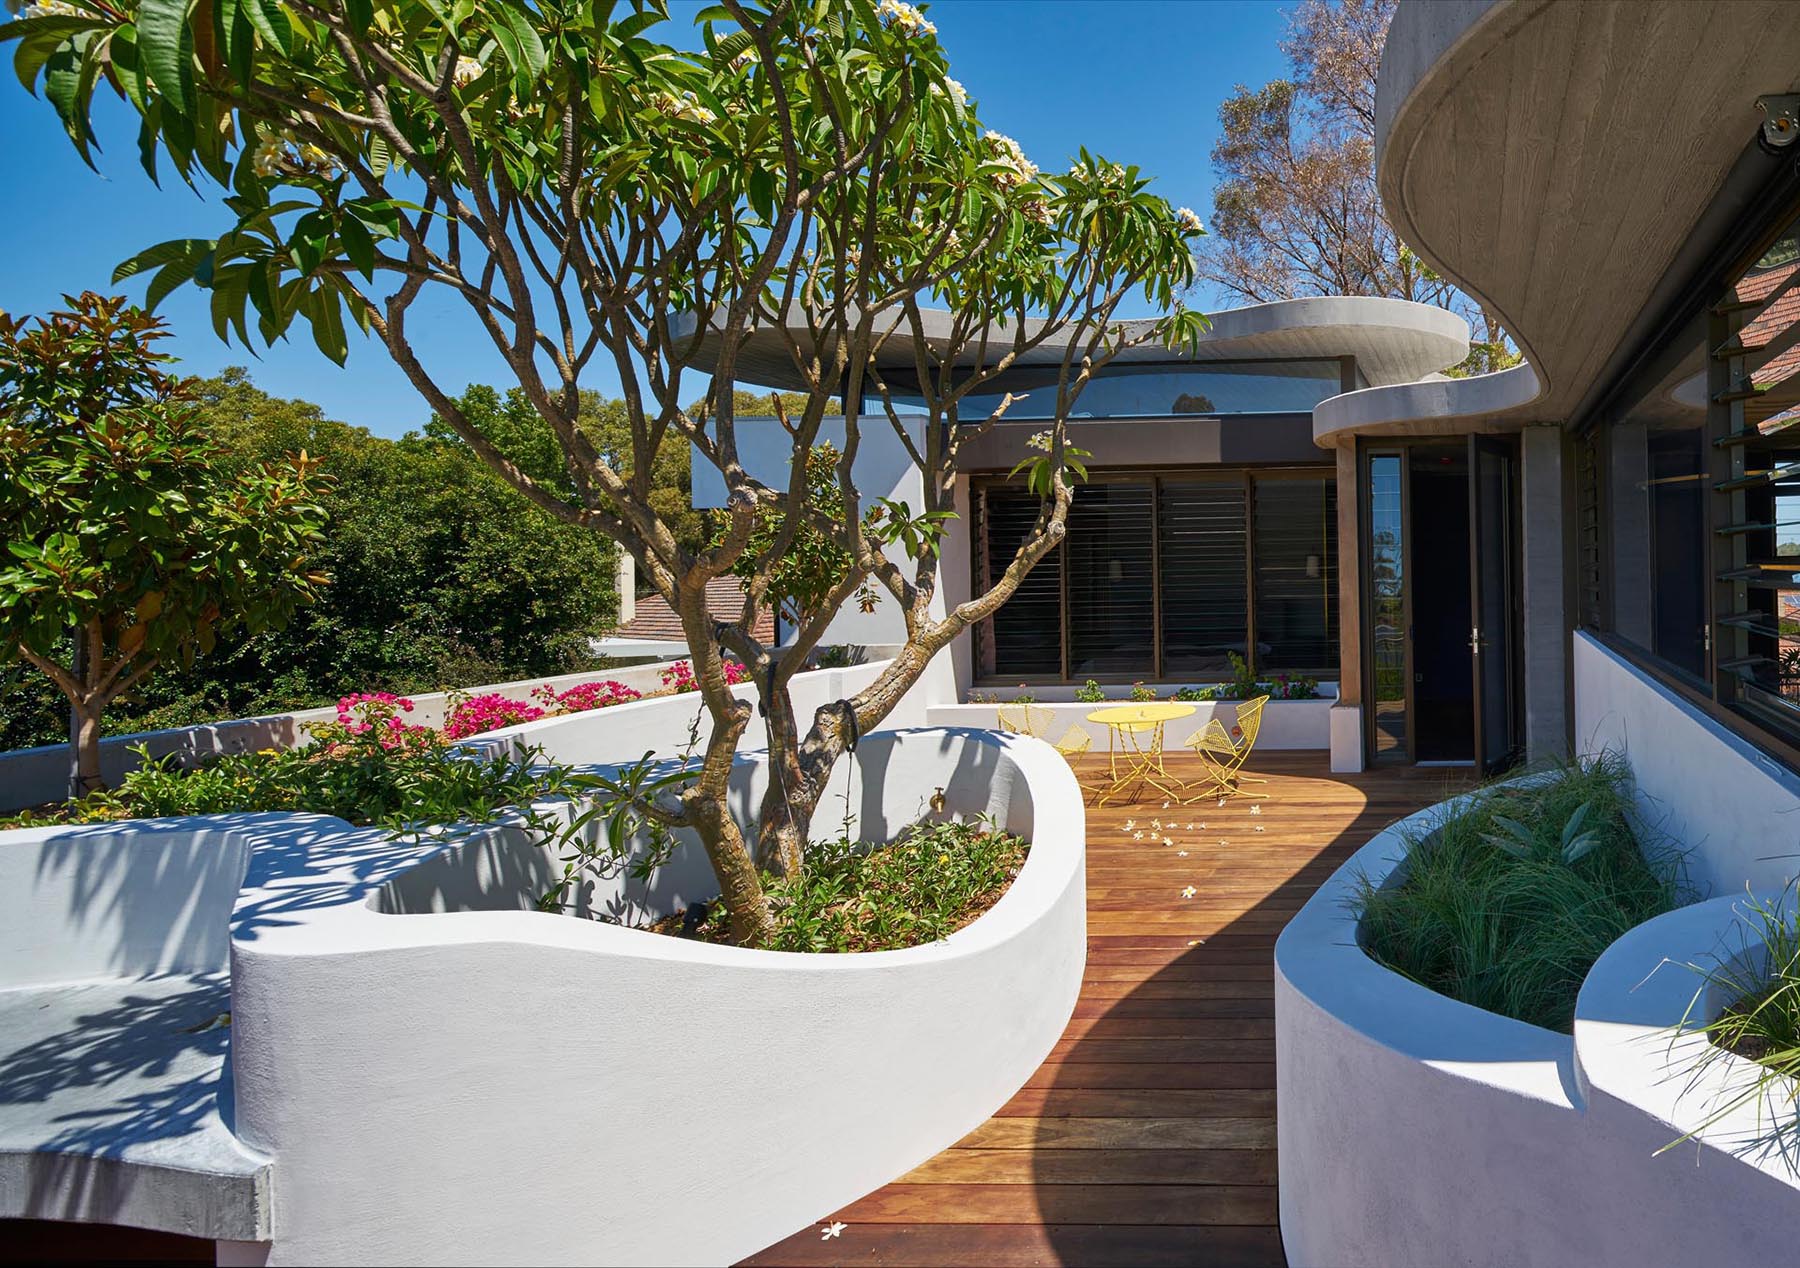 A modern rooftop deck with organically shaped planters that match the roof.